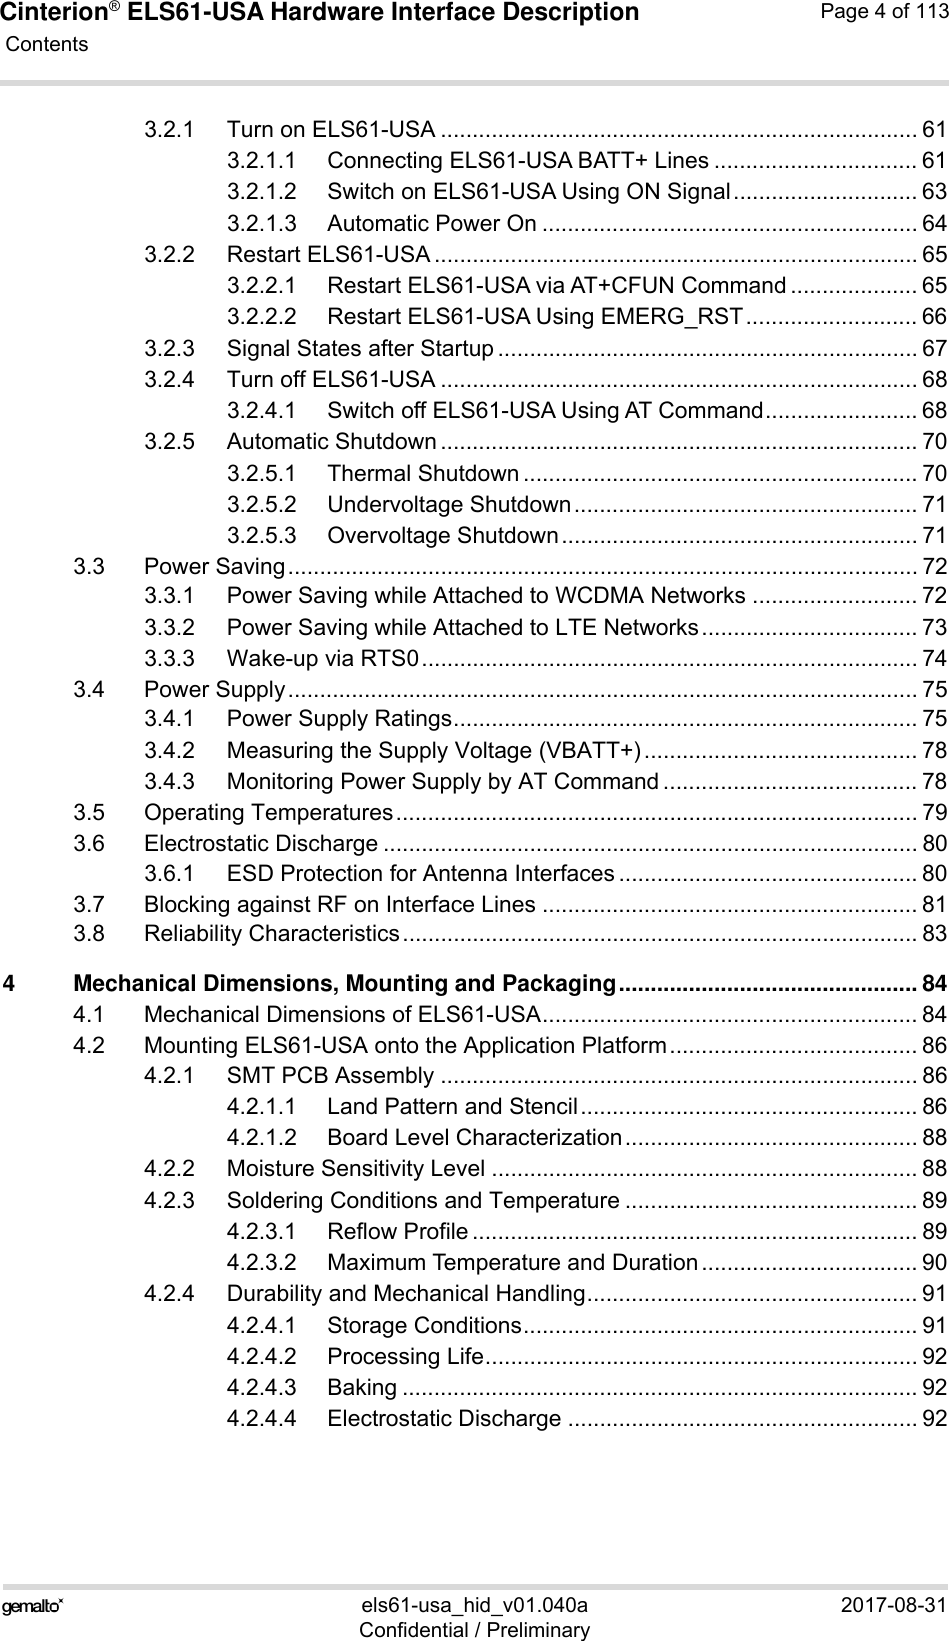 Cinterion® ELS61-USA Hardware Interface Description Contents113els61-usa_hid_v01.040a 2017-08-31Confidential / PreliminaryPage 4 of 1133.2.1 Turn on ELS61-USA ........................................................................... 613.2.1.1 Connecting ELS61-USA BATT+ Lines ................................ 613.2.1.2 Switch on ELS61-USA Using ON Signal............................. 633.2.1.3 Automatic Power On ........................................................... 643.2.2 Restart ELS61-USA ............................................................................ 653.2.2.1 Restart ELS61-USA via AT+CFUN Command .................... 653.2.2.2 Restart ELS61-USA Using EMERG_RST ........................... 663.2.3 Signal States after Startup .................................................................. 673.2.4 Turn off ELS61-USA ........................................................................... 683.2.4.1 Switch off ELS61-USA Using AT Command........................ 683.2.5 Automatic Shutdown ........................................................................... 703.2.5.1 Thermal Shutdown .............................................................. 703.2.5.2 Undervoltage Shutdown...................................................... 713.2.5.3 Overvoltage Shutdown........................................................ 713.3 Power Saving................................................................................................... 723.3.1 Power Saving while Attached to WCDMA Networks .......................... 723.3.2 Power Saving while Attached to LTE Networks.................................. 733.3.3 Wake-up via RTS0.............................................................................. 743.4 Power Supply................................................................................................... 753.4.1 Power Supply Ratings......................................................................... 753.4.2 Measuring the Supply Voltage (VBATT+)........................................... 783.4.3 Monitoring Power Supply by AT Command ........................................ 783.5 Operating Temperatures.................................................................................. 793.6 Electrostatic Discharge .................................................................................... 803.6.1 ESD Protection for Antenna Interfaces ............................................... 803.7 Blocking against RF on Interface Lines ........................................................... 813.8 Reliability Characteristics................................................................................. 834 Mechanical Dimensions, Mounting and Packaging............................................... 844.1 Mechanical Dimensions of ELS61-USA........................................................... 844.2 Mounting ELS61-USA onto the Application Platform....................................... 864.2.1 SMT PCB Assembly ........................................................................... 864.2.1.1 Land Pattern and Stencil..................................................... 864.2.1.2 Board Level Characterization.............................................. 884.2.2 Moisture Sensitivity Level ................................................................... 884.2.3 Soldering Conditions and Temperature .............................................. 894.2.3.1 Reflow Profile ...................................................................... 894.2.3.2 Maximum Temperature and Duration.................................. 904.2.4 Durability and Mechanical Handling.................................................... 914.2.4.1 Storage Conditions.............................................................. 914.2.4.2 Processing Life.................................................................... 924.2.4.3 Baking ................................................................................. 924.2.4.4 Electrostatic Discharge ....................................................... 92